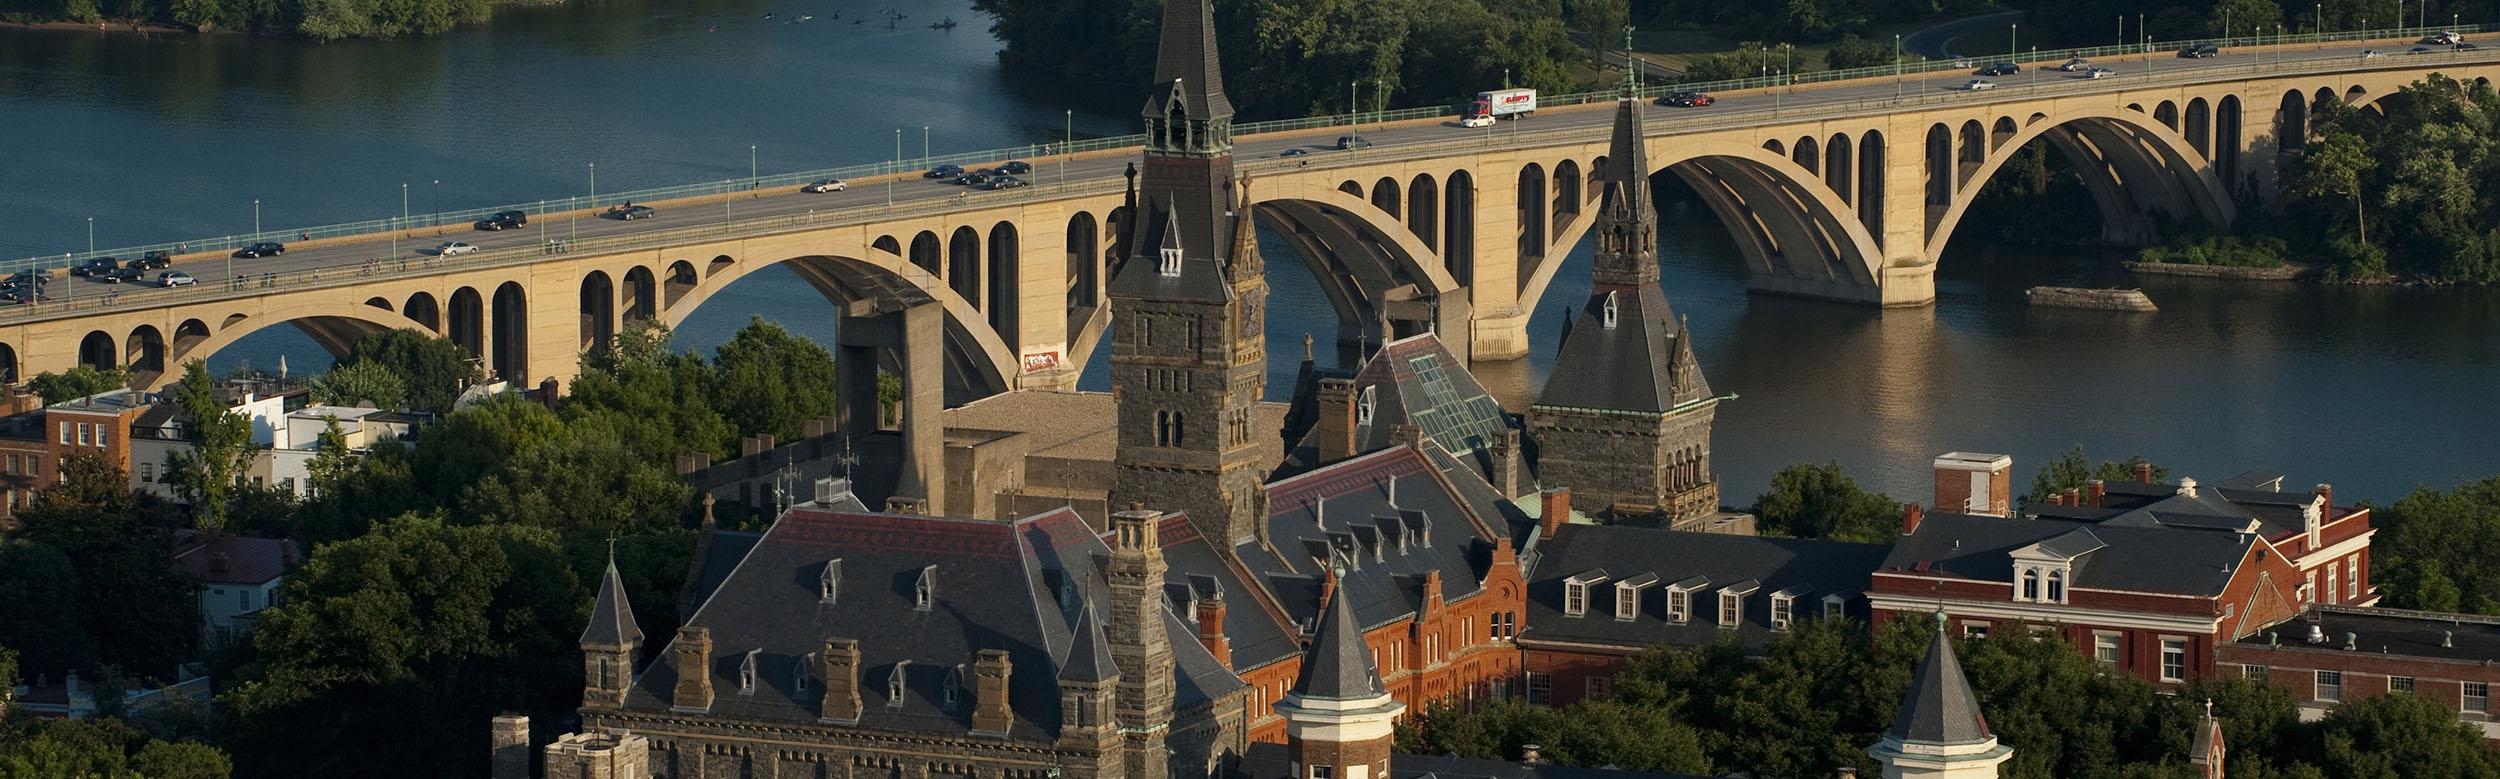 Aerial view of Georgetown campus with the Key Bridge and Potomac River in the background